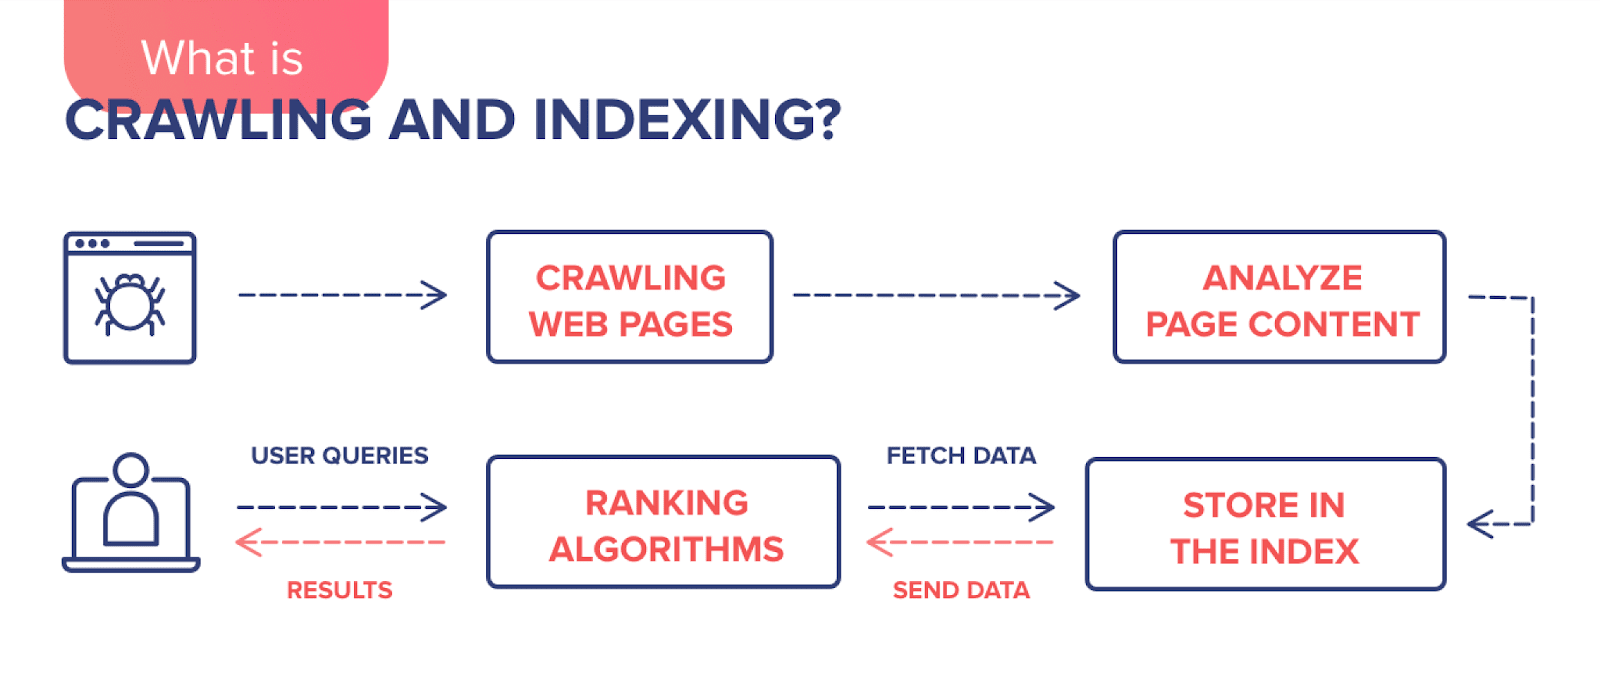 What is crawling and indexing